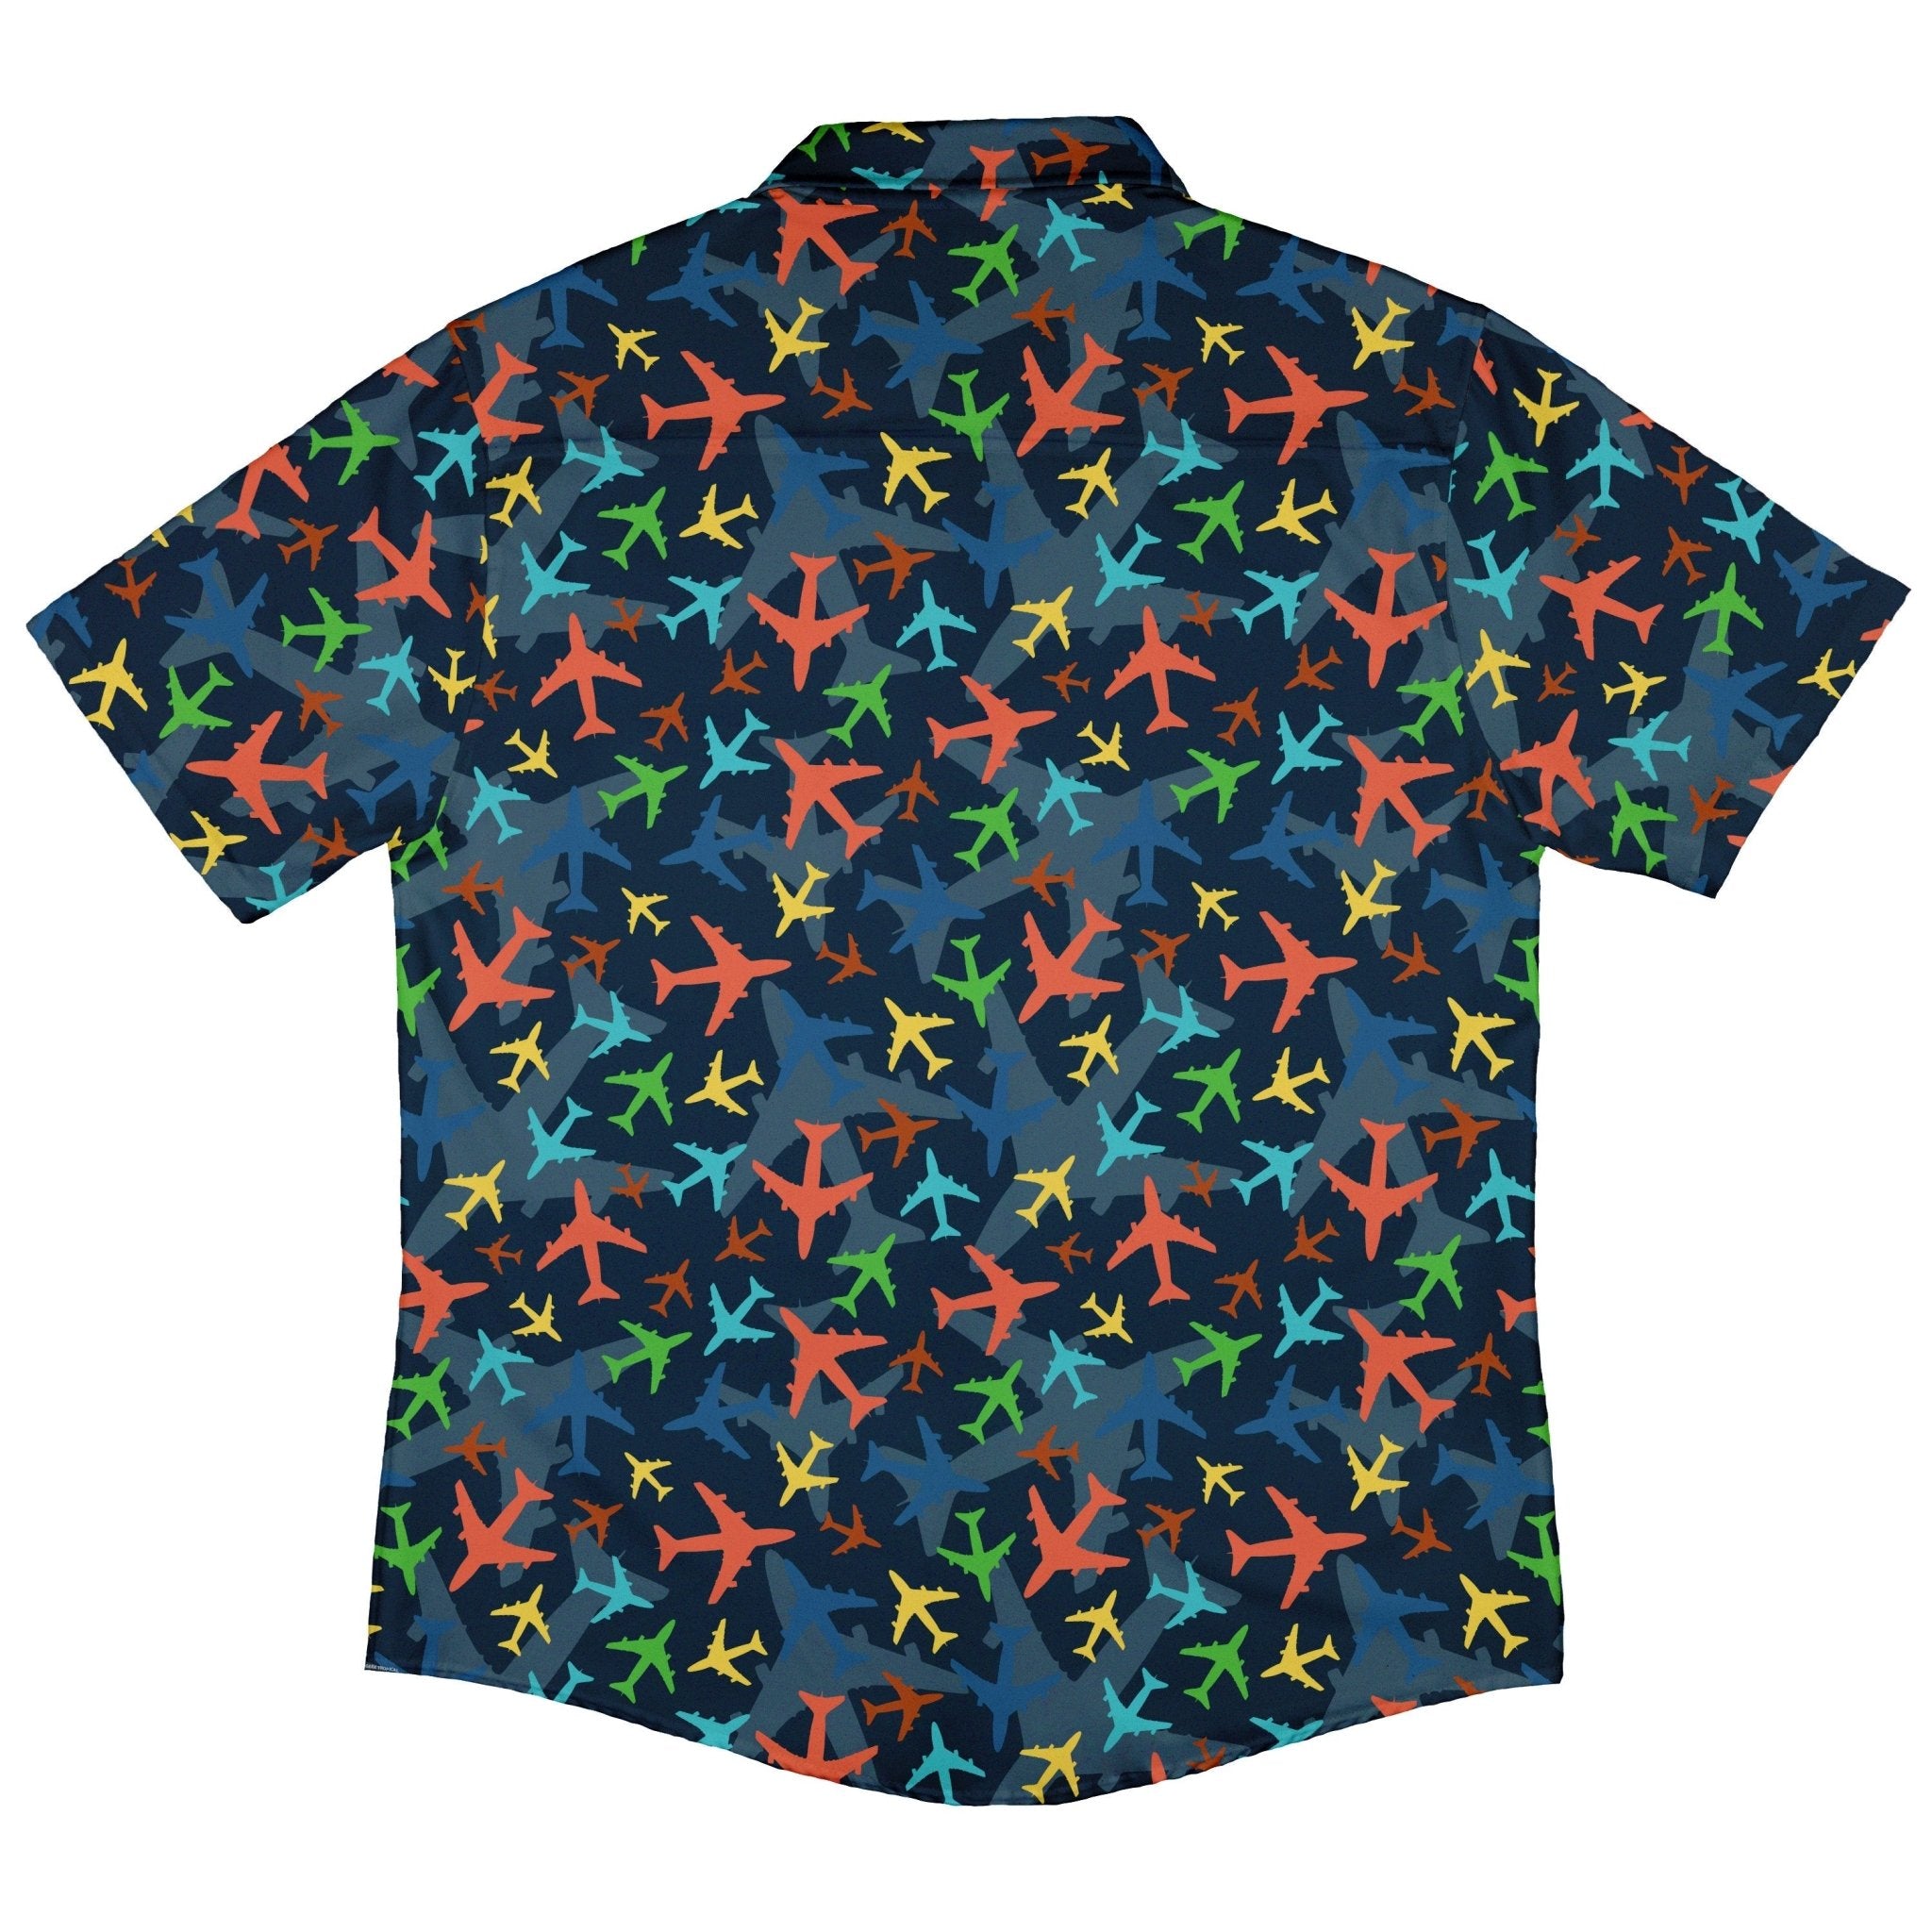 Multi Colored Airplanes on Blue Button Up Shirt - adult sizing - aviation print -